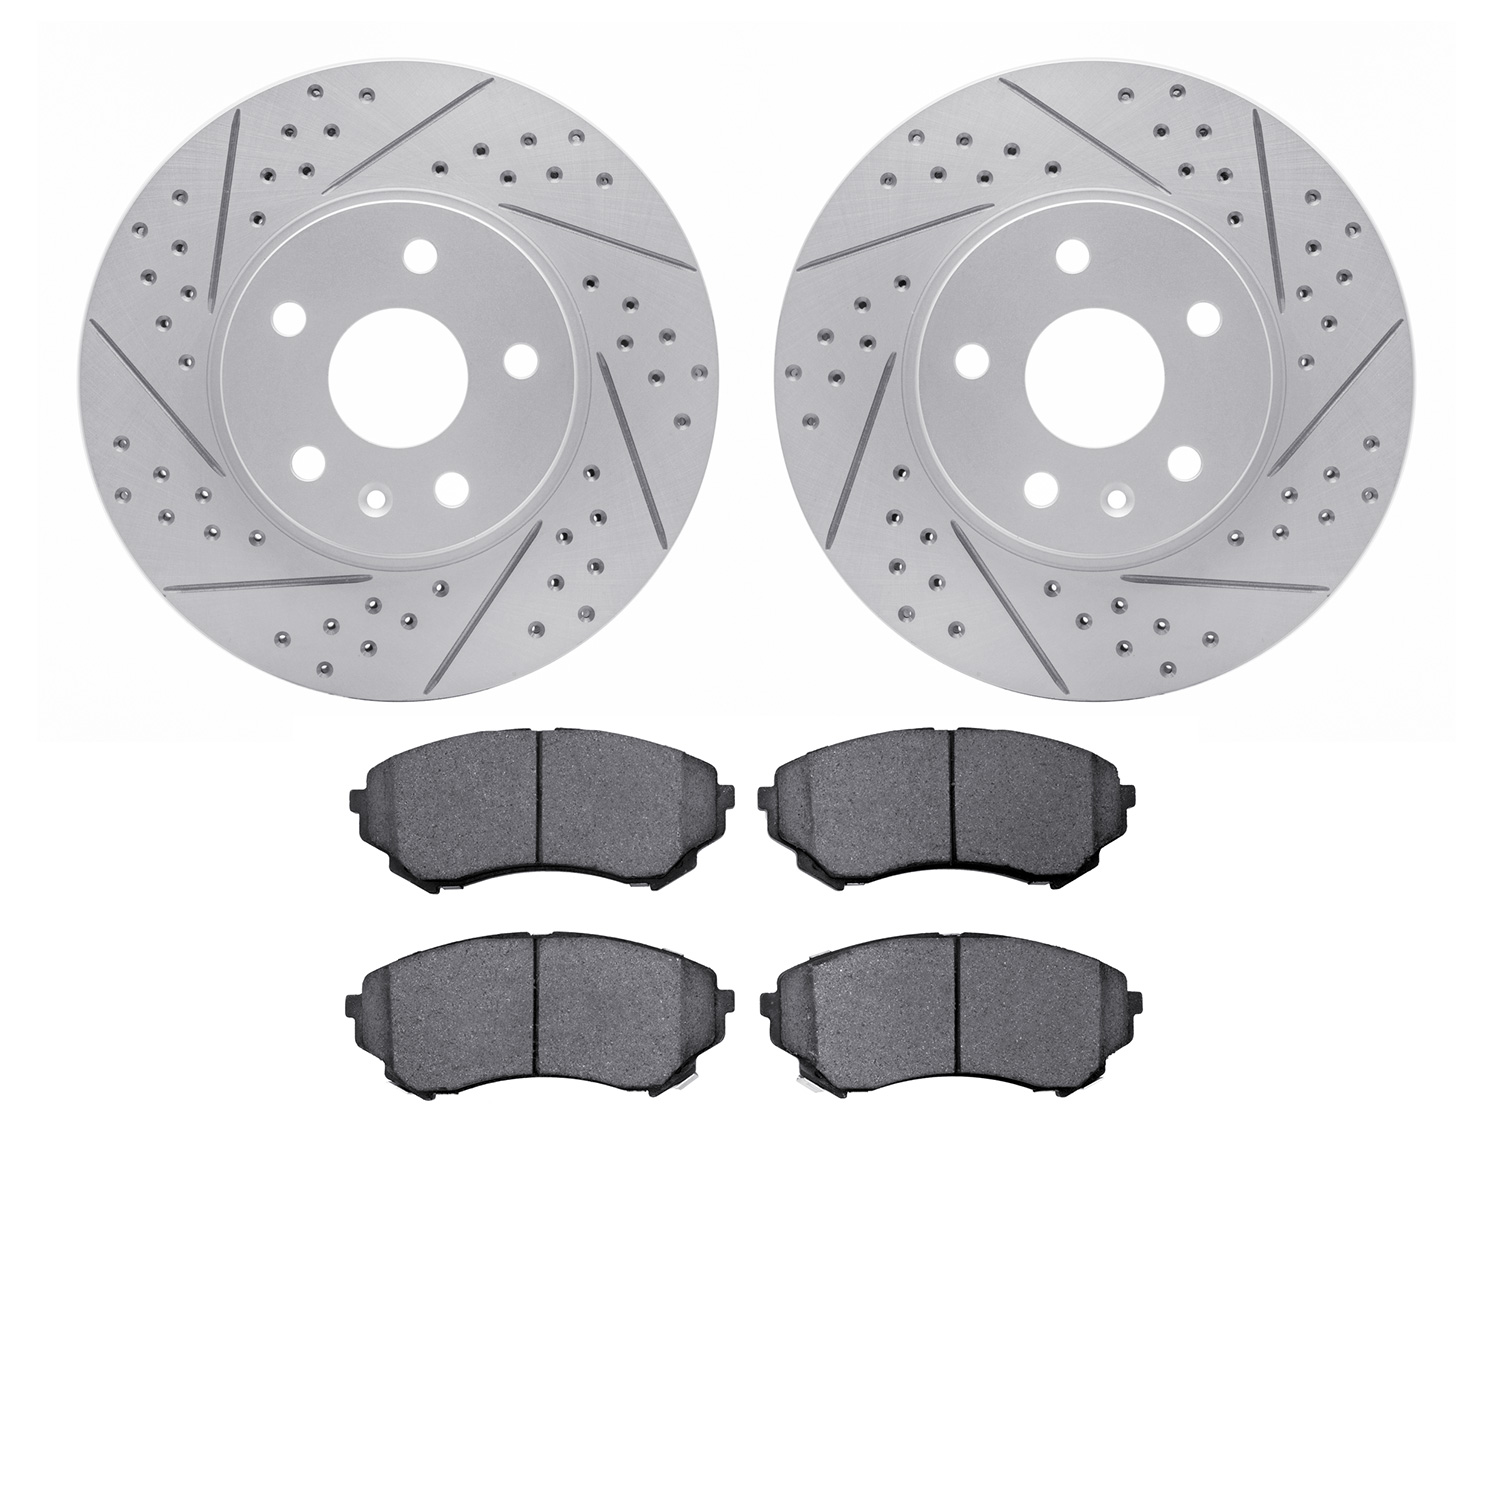 2502-46026 Geoperformance Drilled/Slotted Rotors w/5000 Advanced Brake Pads Kit, 2014-2014 GM, Position: Front